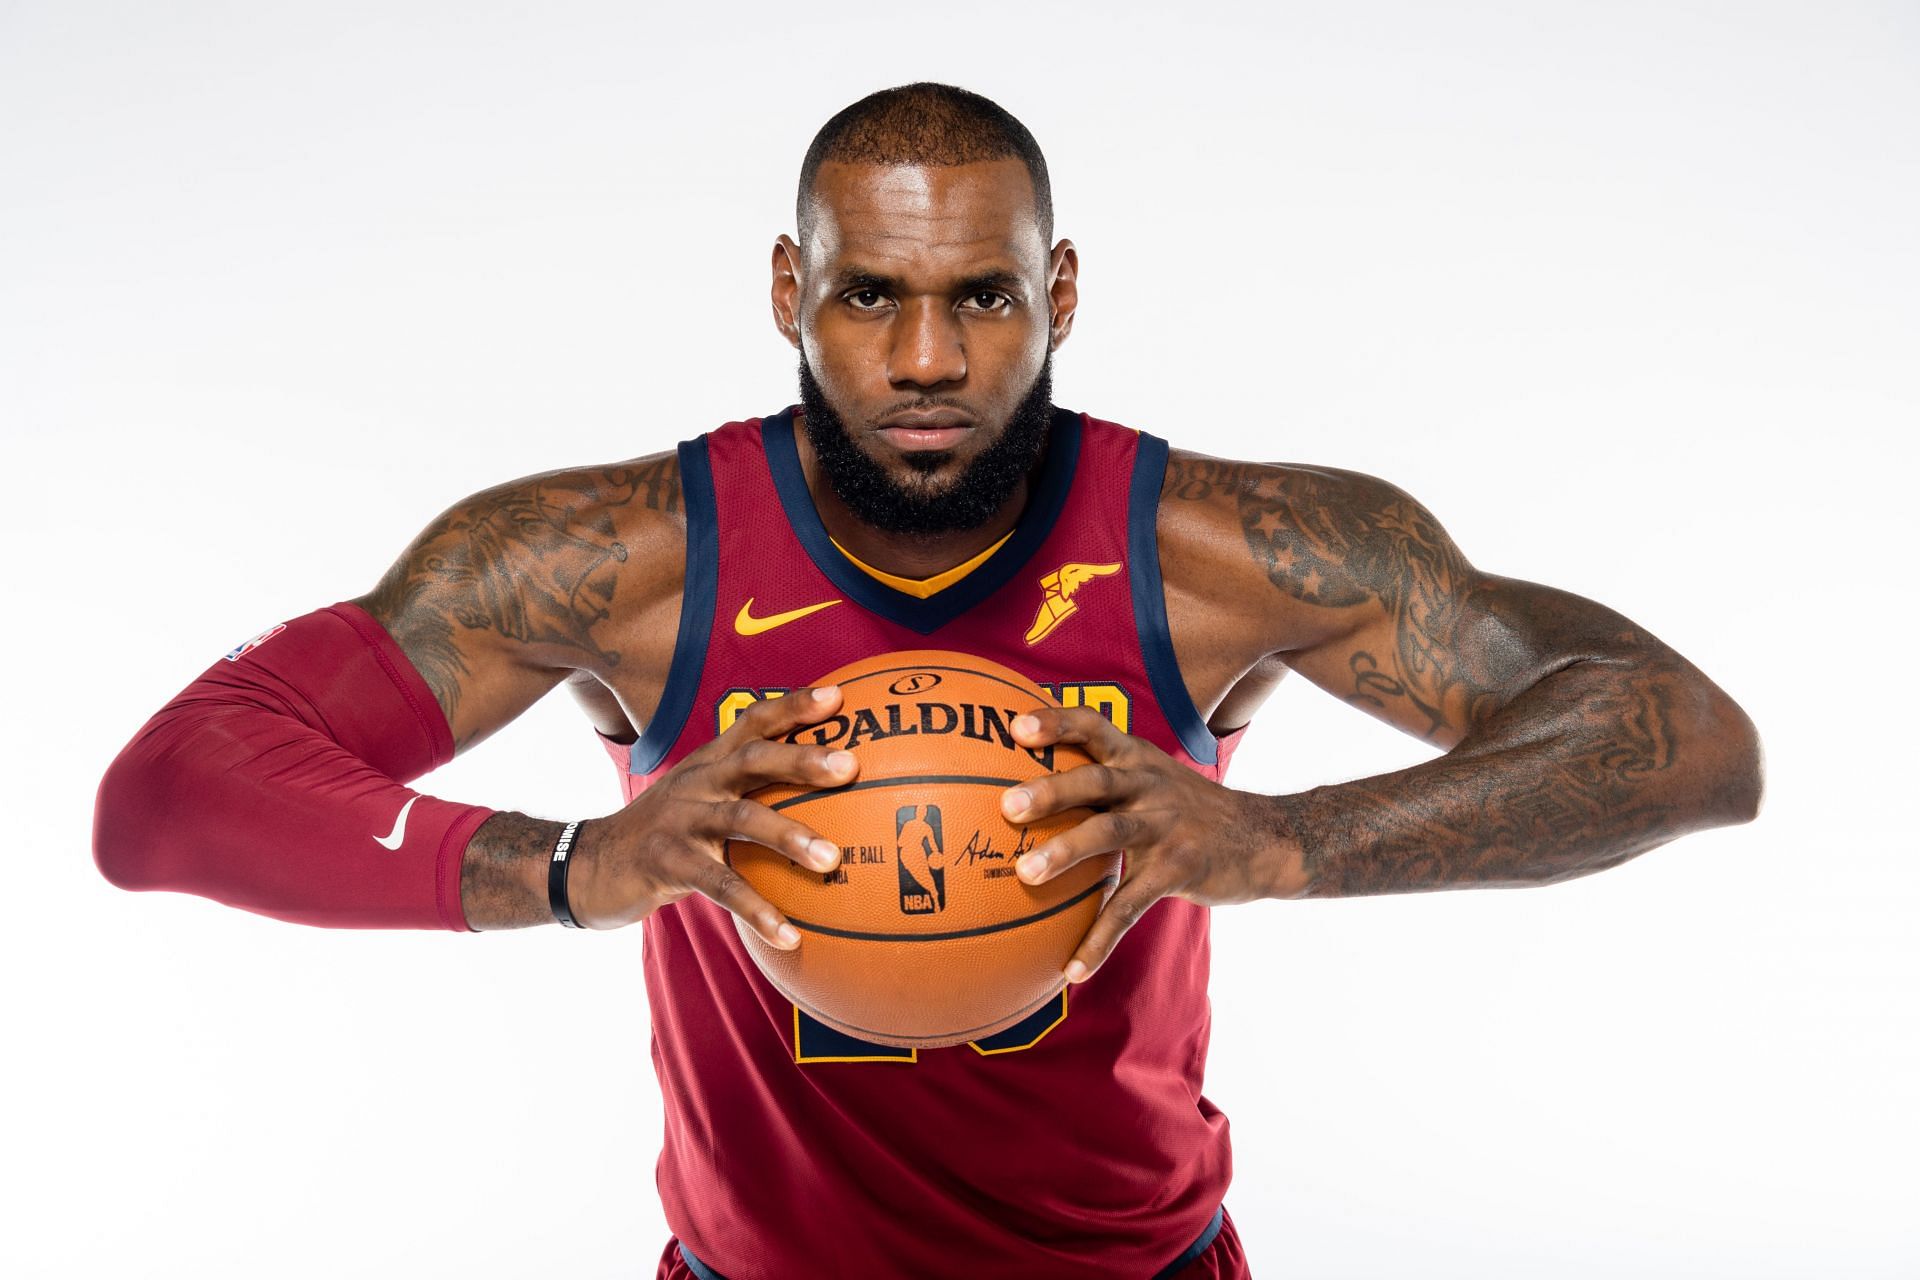 Cleveland Cavaliers Media Day - LeBron James